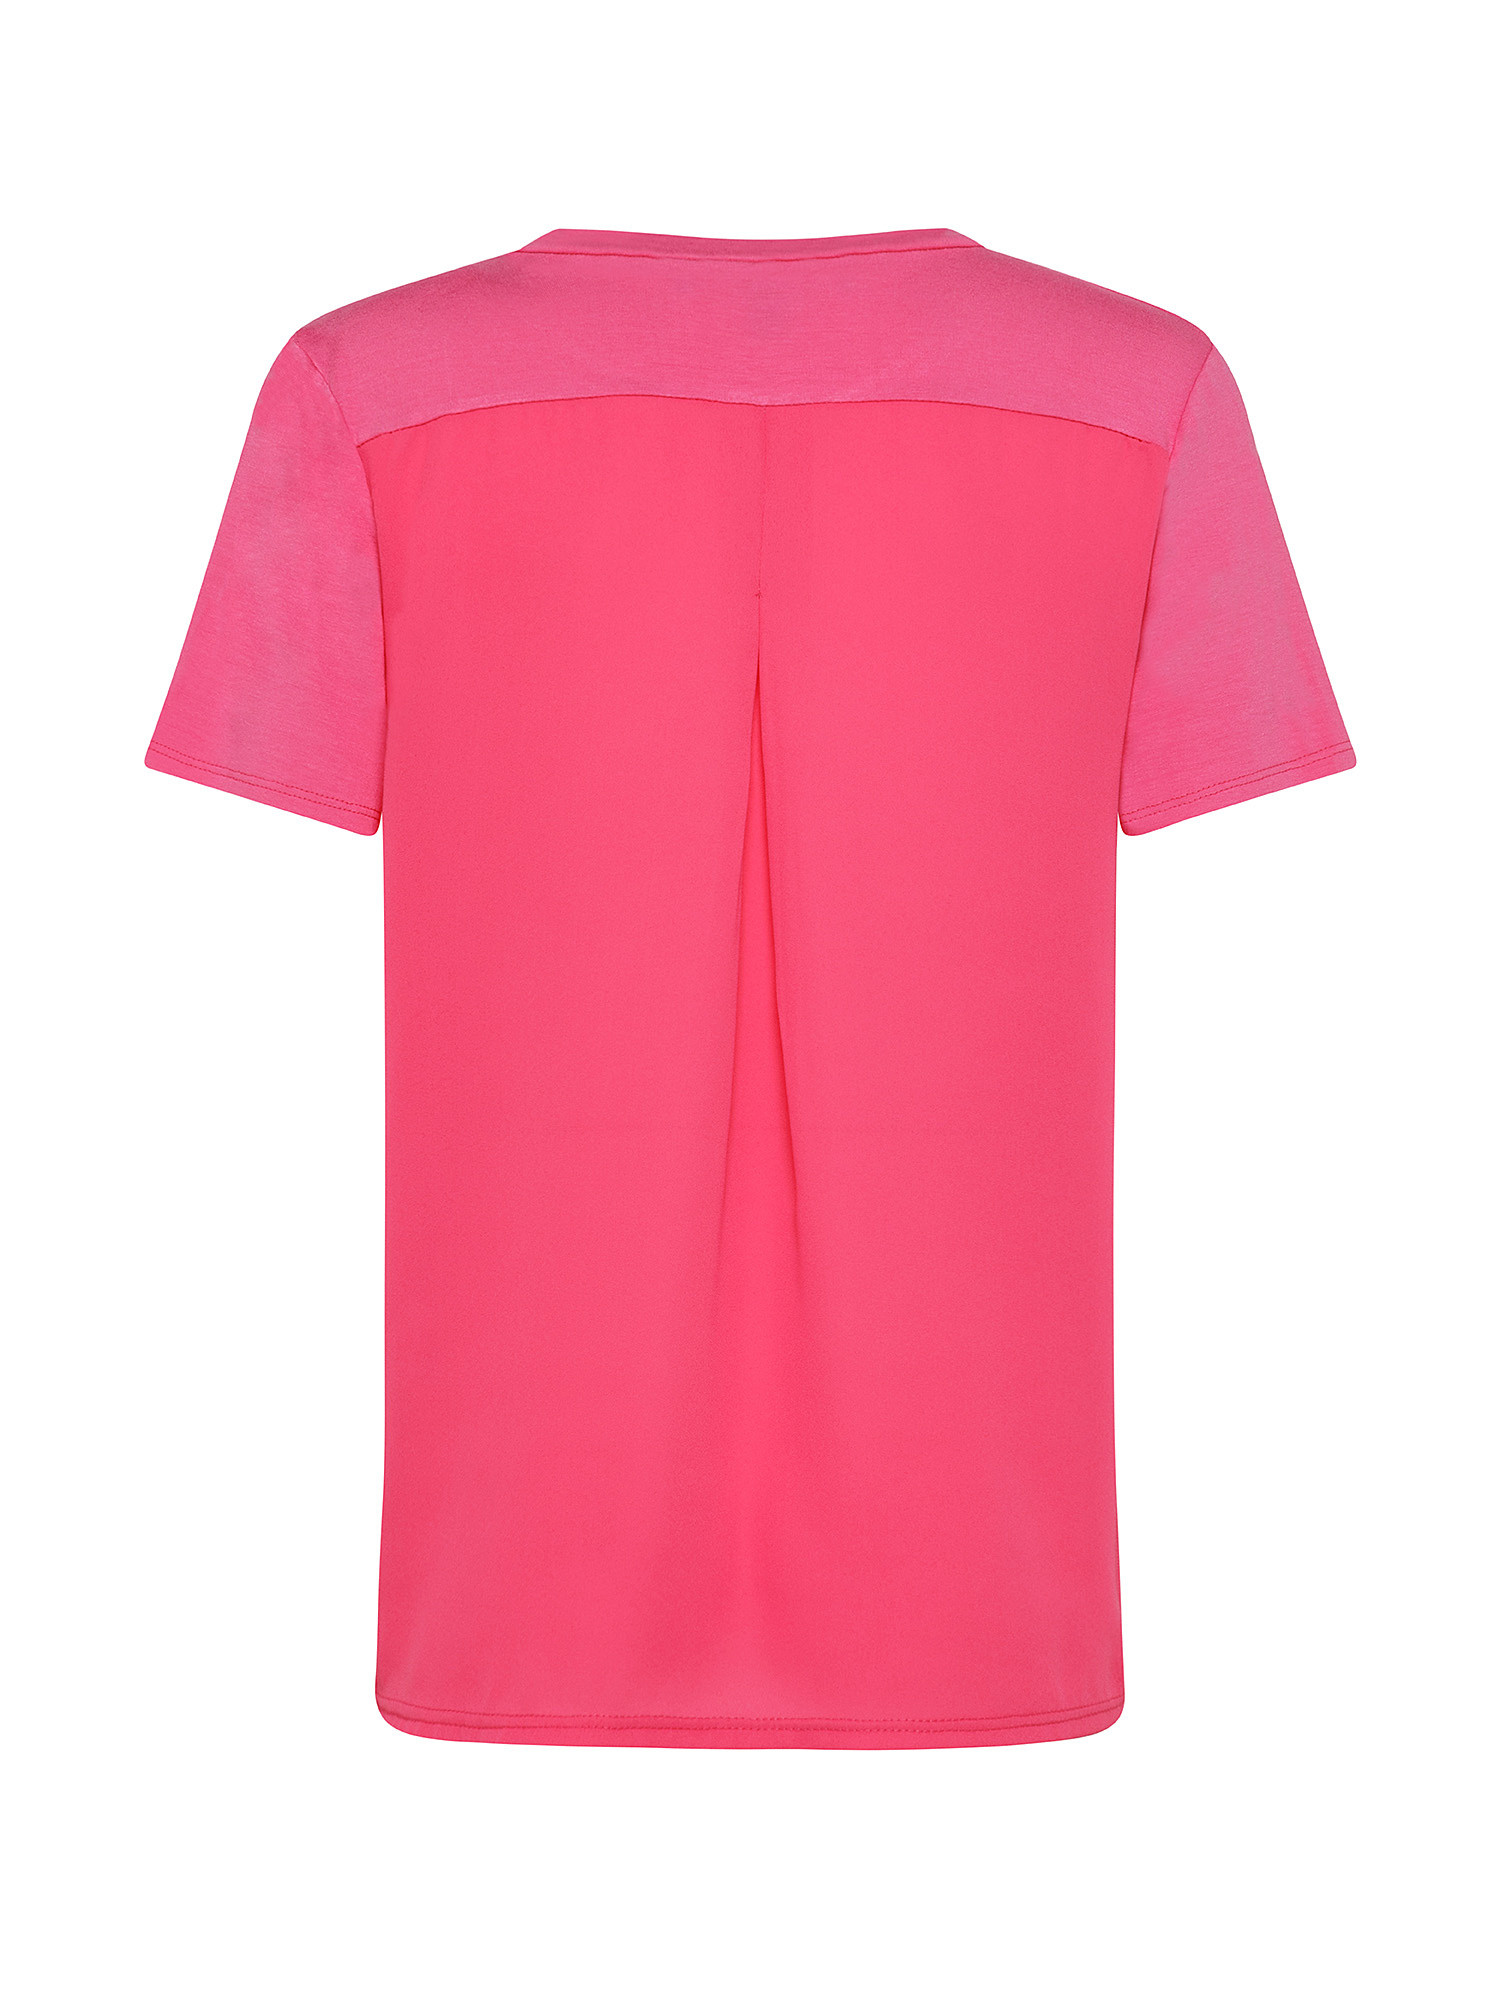 T-shirt with fabric back, Pink Fuchsia, large image number 1